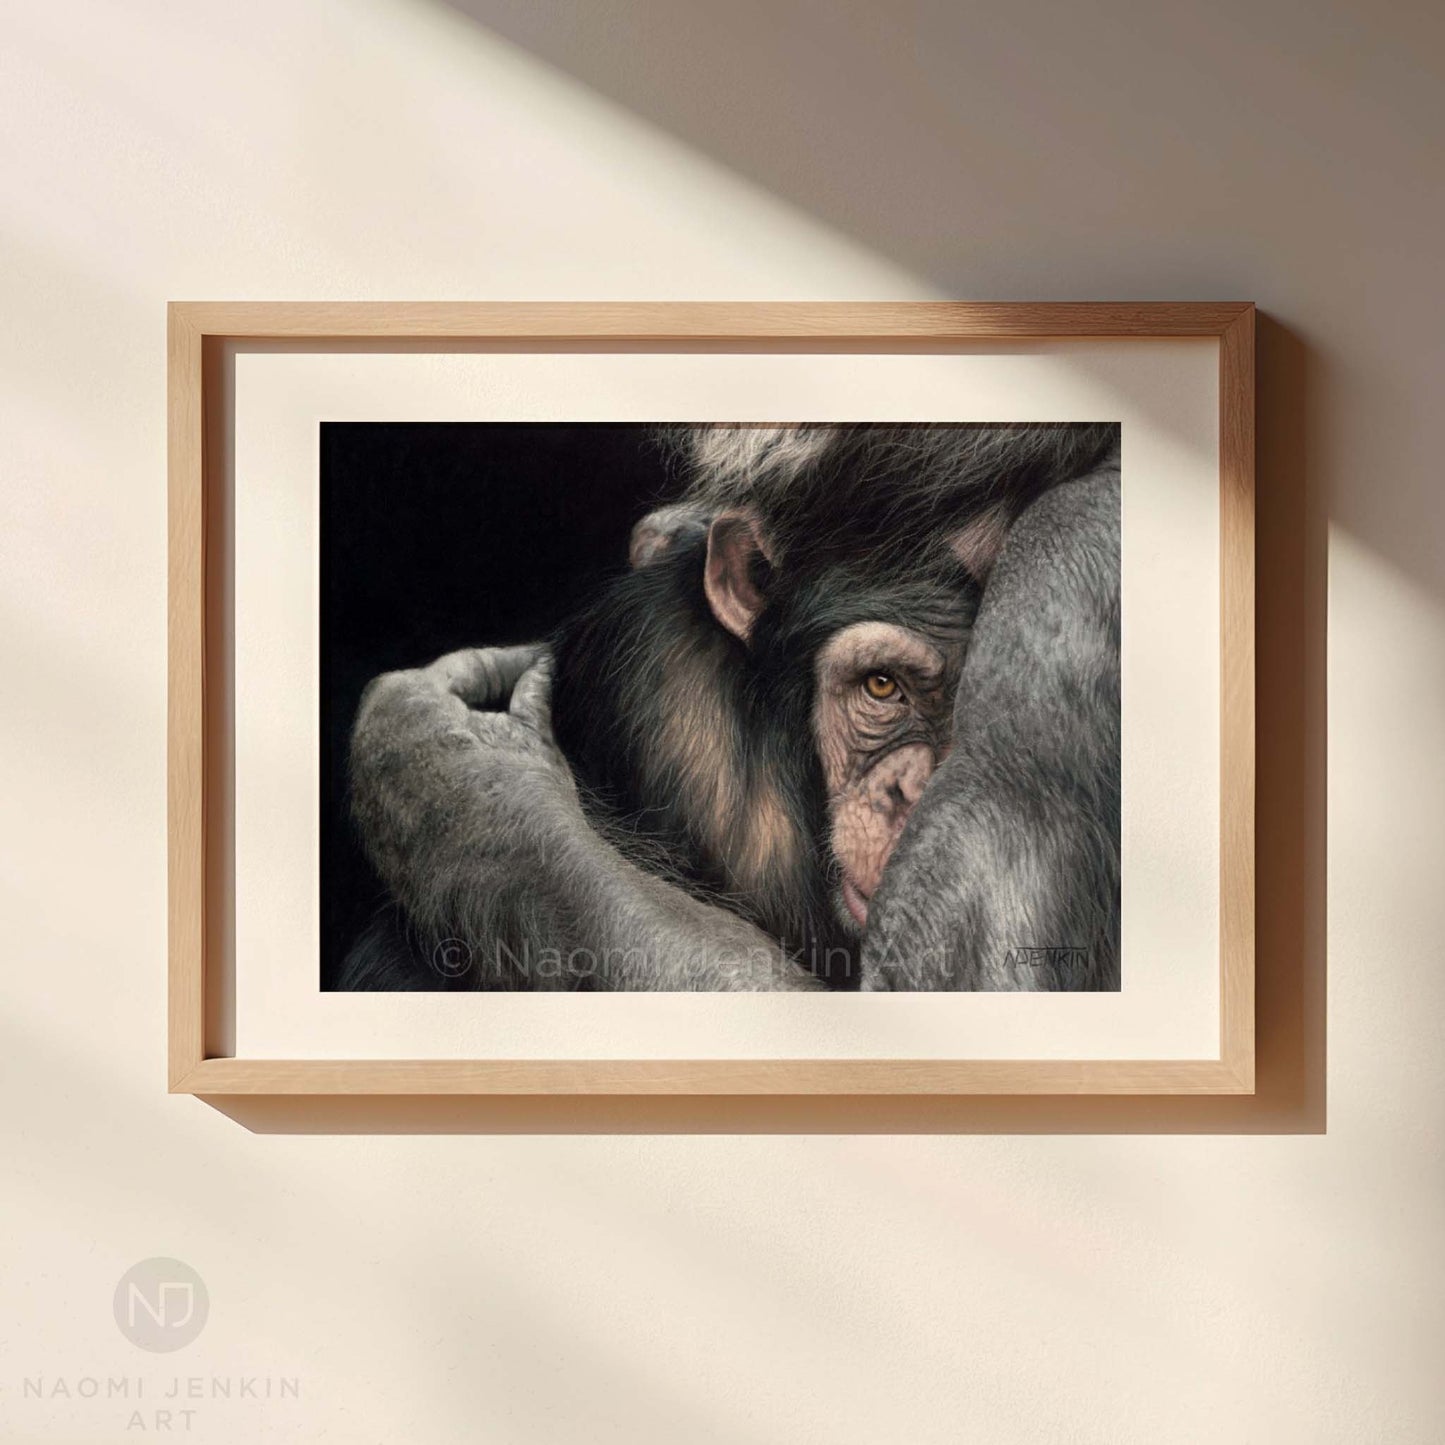 Framed limited edition print of "Embrace", a chimpanzee drawing by Naomi Jenkin Art. 